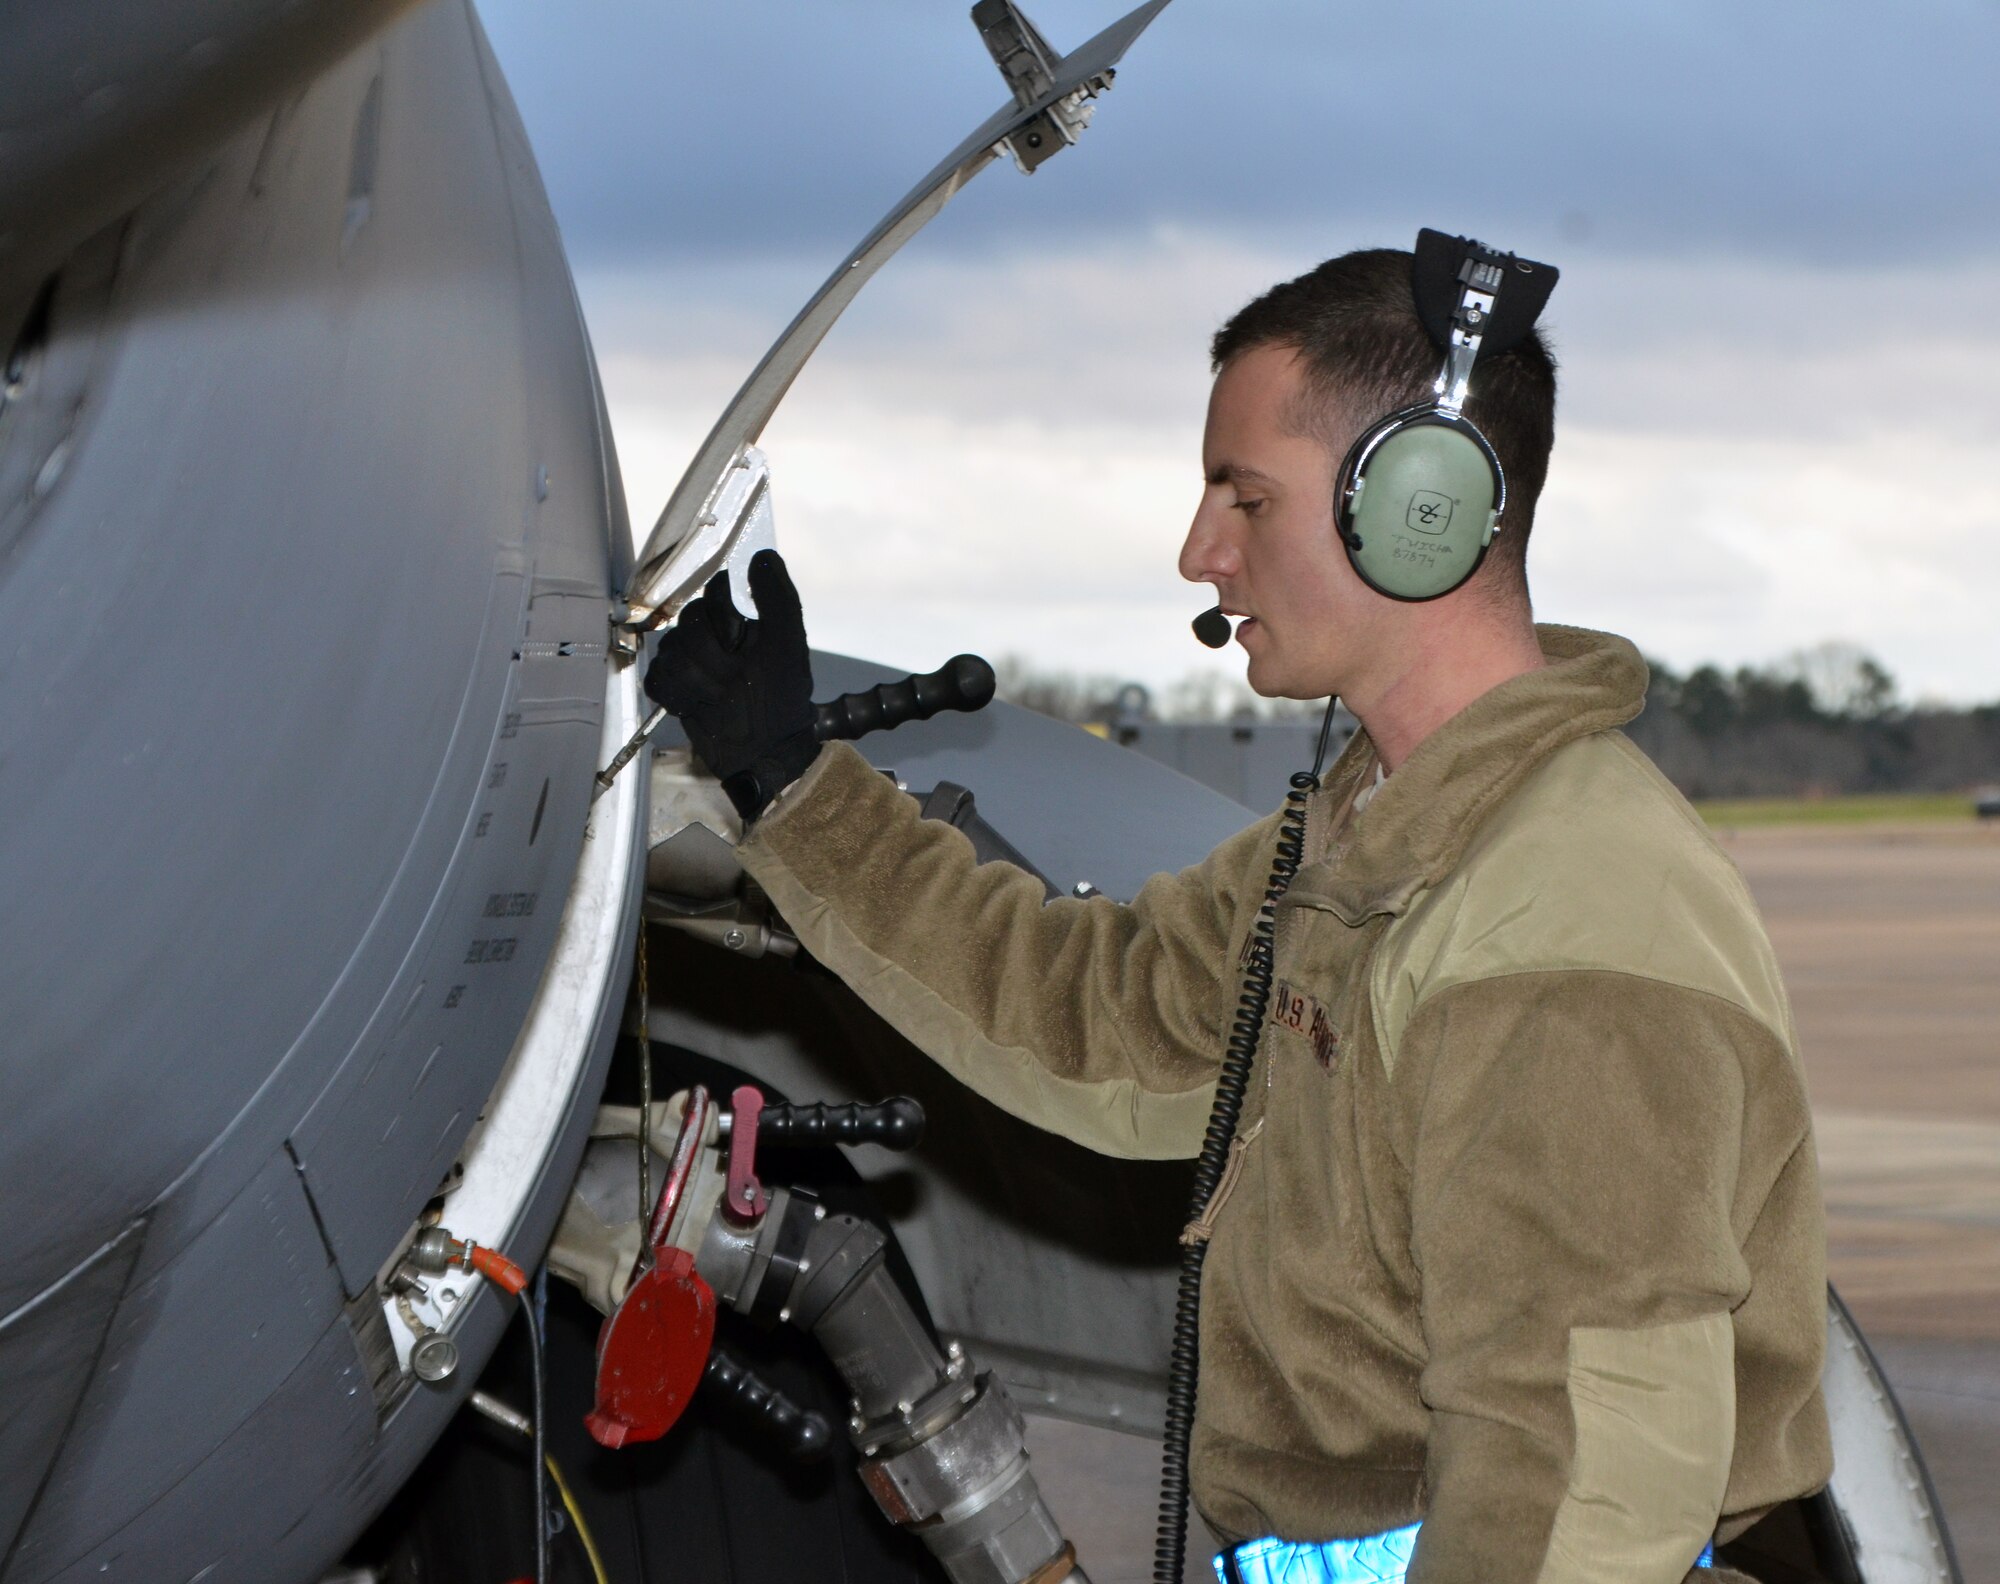 The 172d Aircraft Maintenance Squadron’s Technical Sergeant Todd M. Wicha coordinates fueling of a C-17 Globemaster III January 29, 2020, Thompson Field, Jackson, Miss. Wicha monitors and relays fuel levels to other ground crew personnel. (U. S. Air National Guard photo by Master Sgt. Betsy J. Winstead/Released)